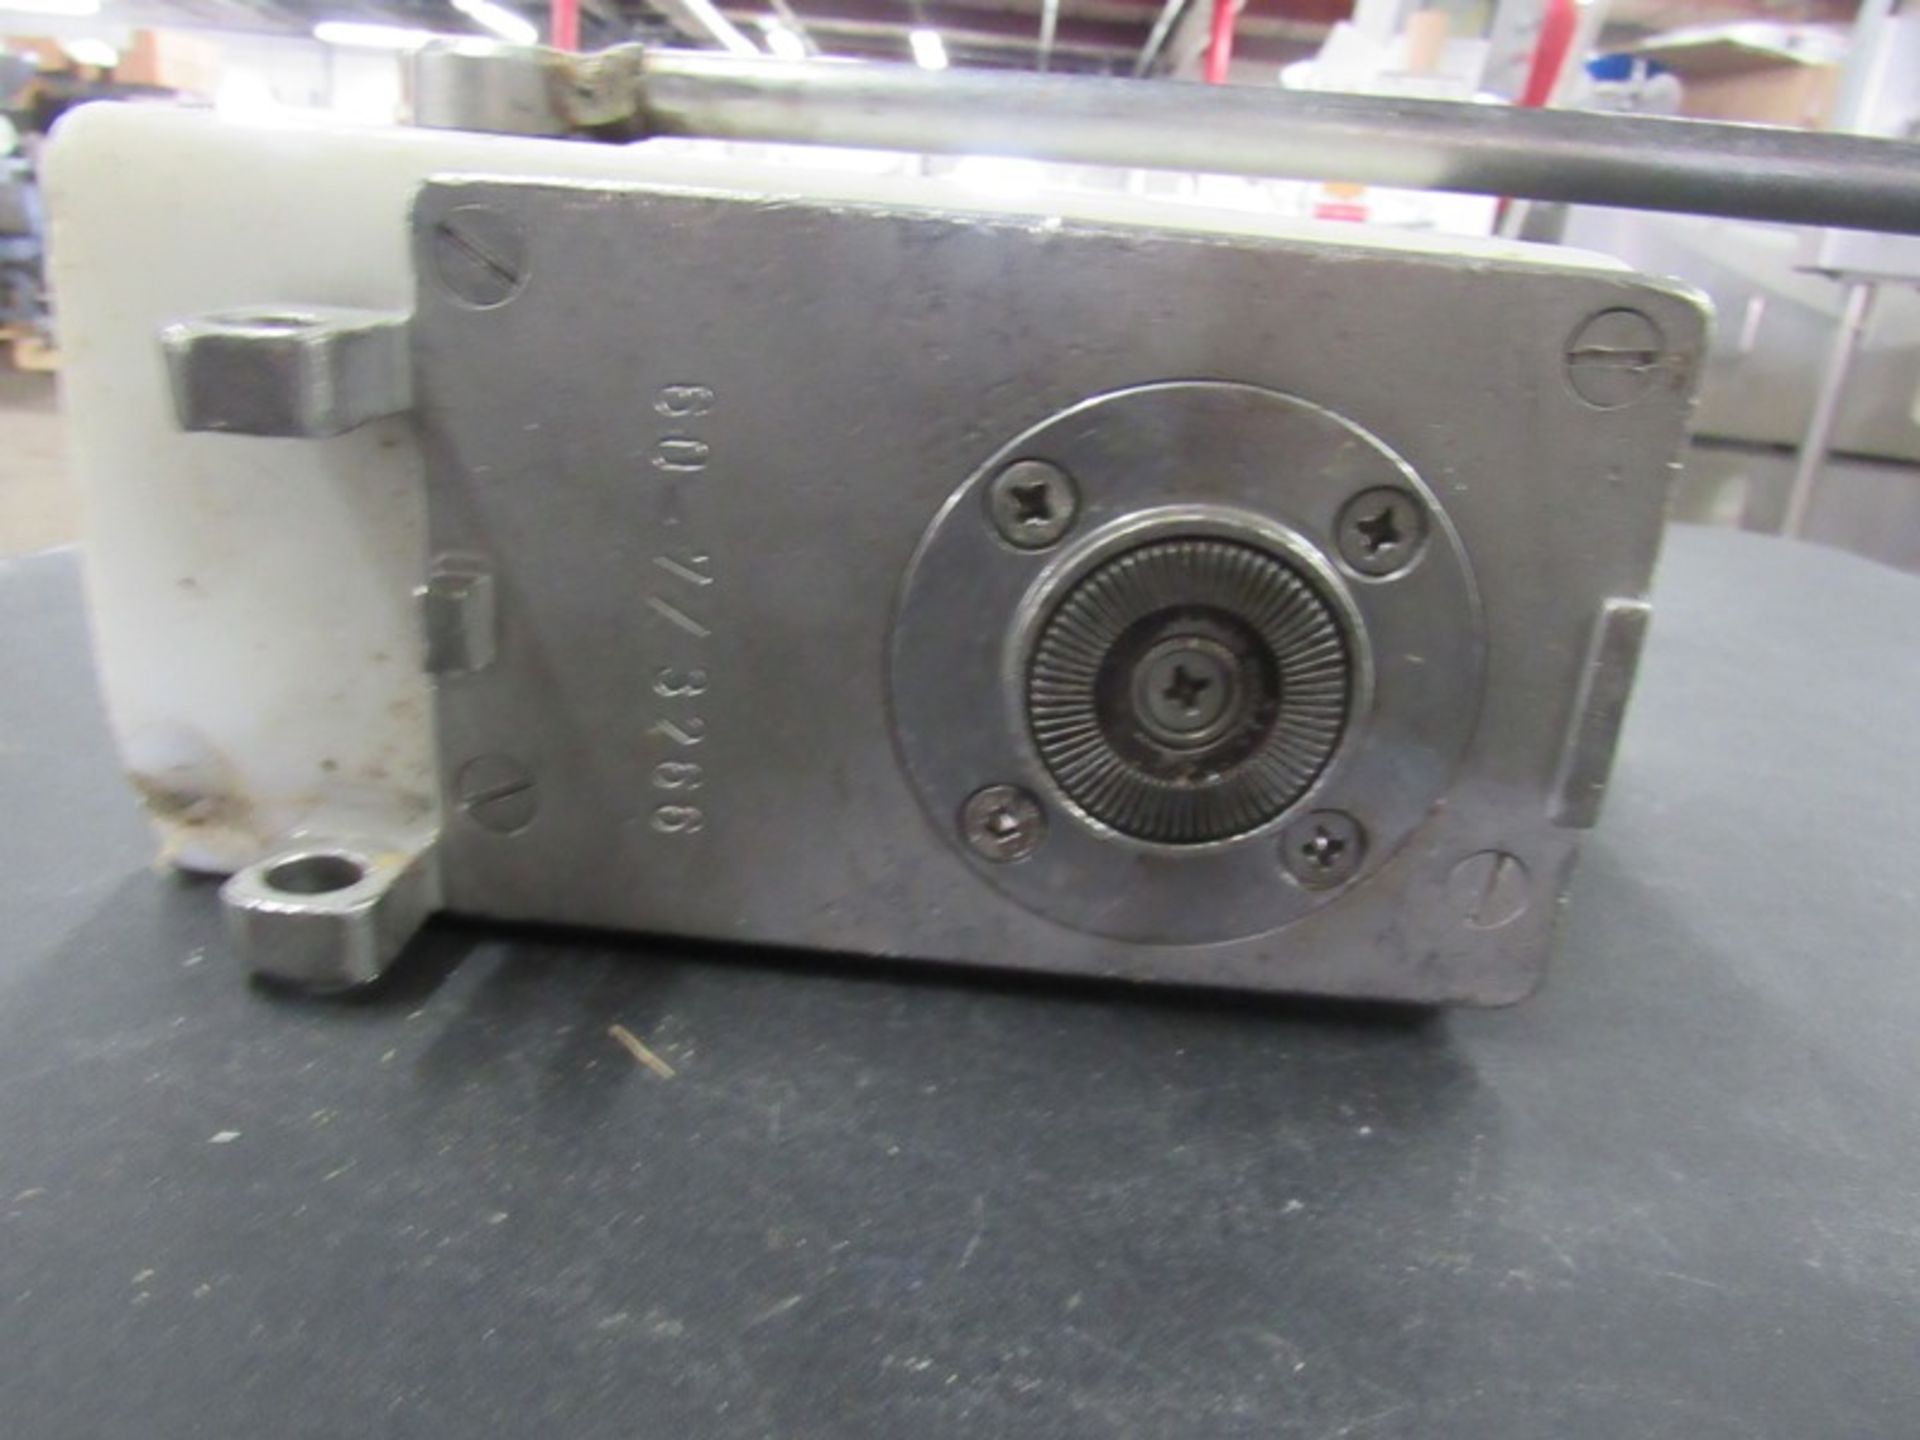 Linker Attachment, Part #60-7/3266 (Required Loading Fee $10- Pickup by Appointment Only) - Image 2 of 3